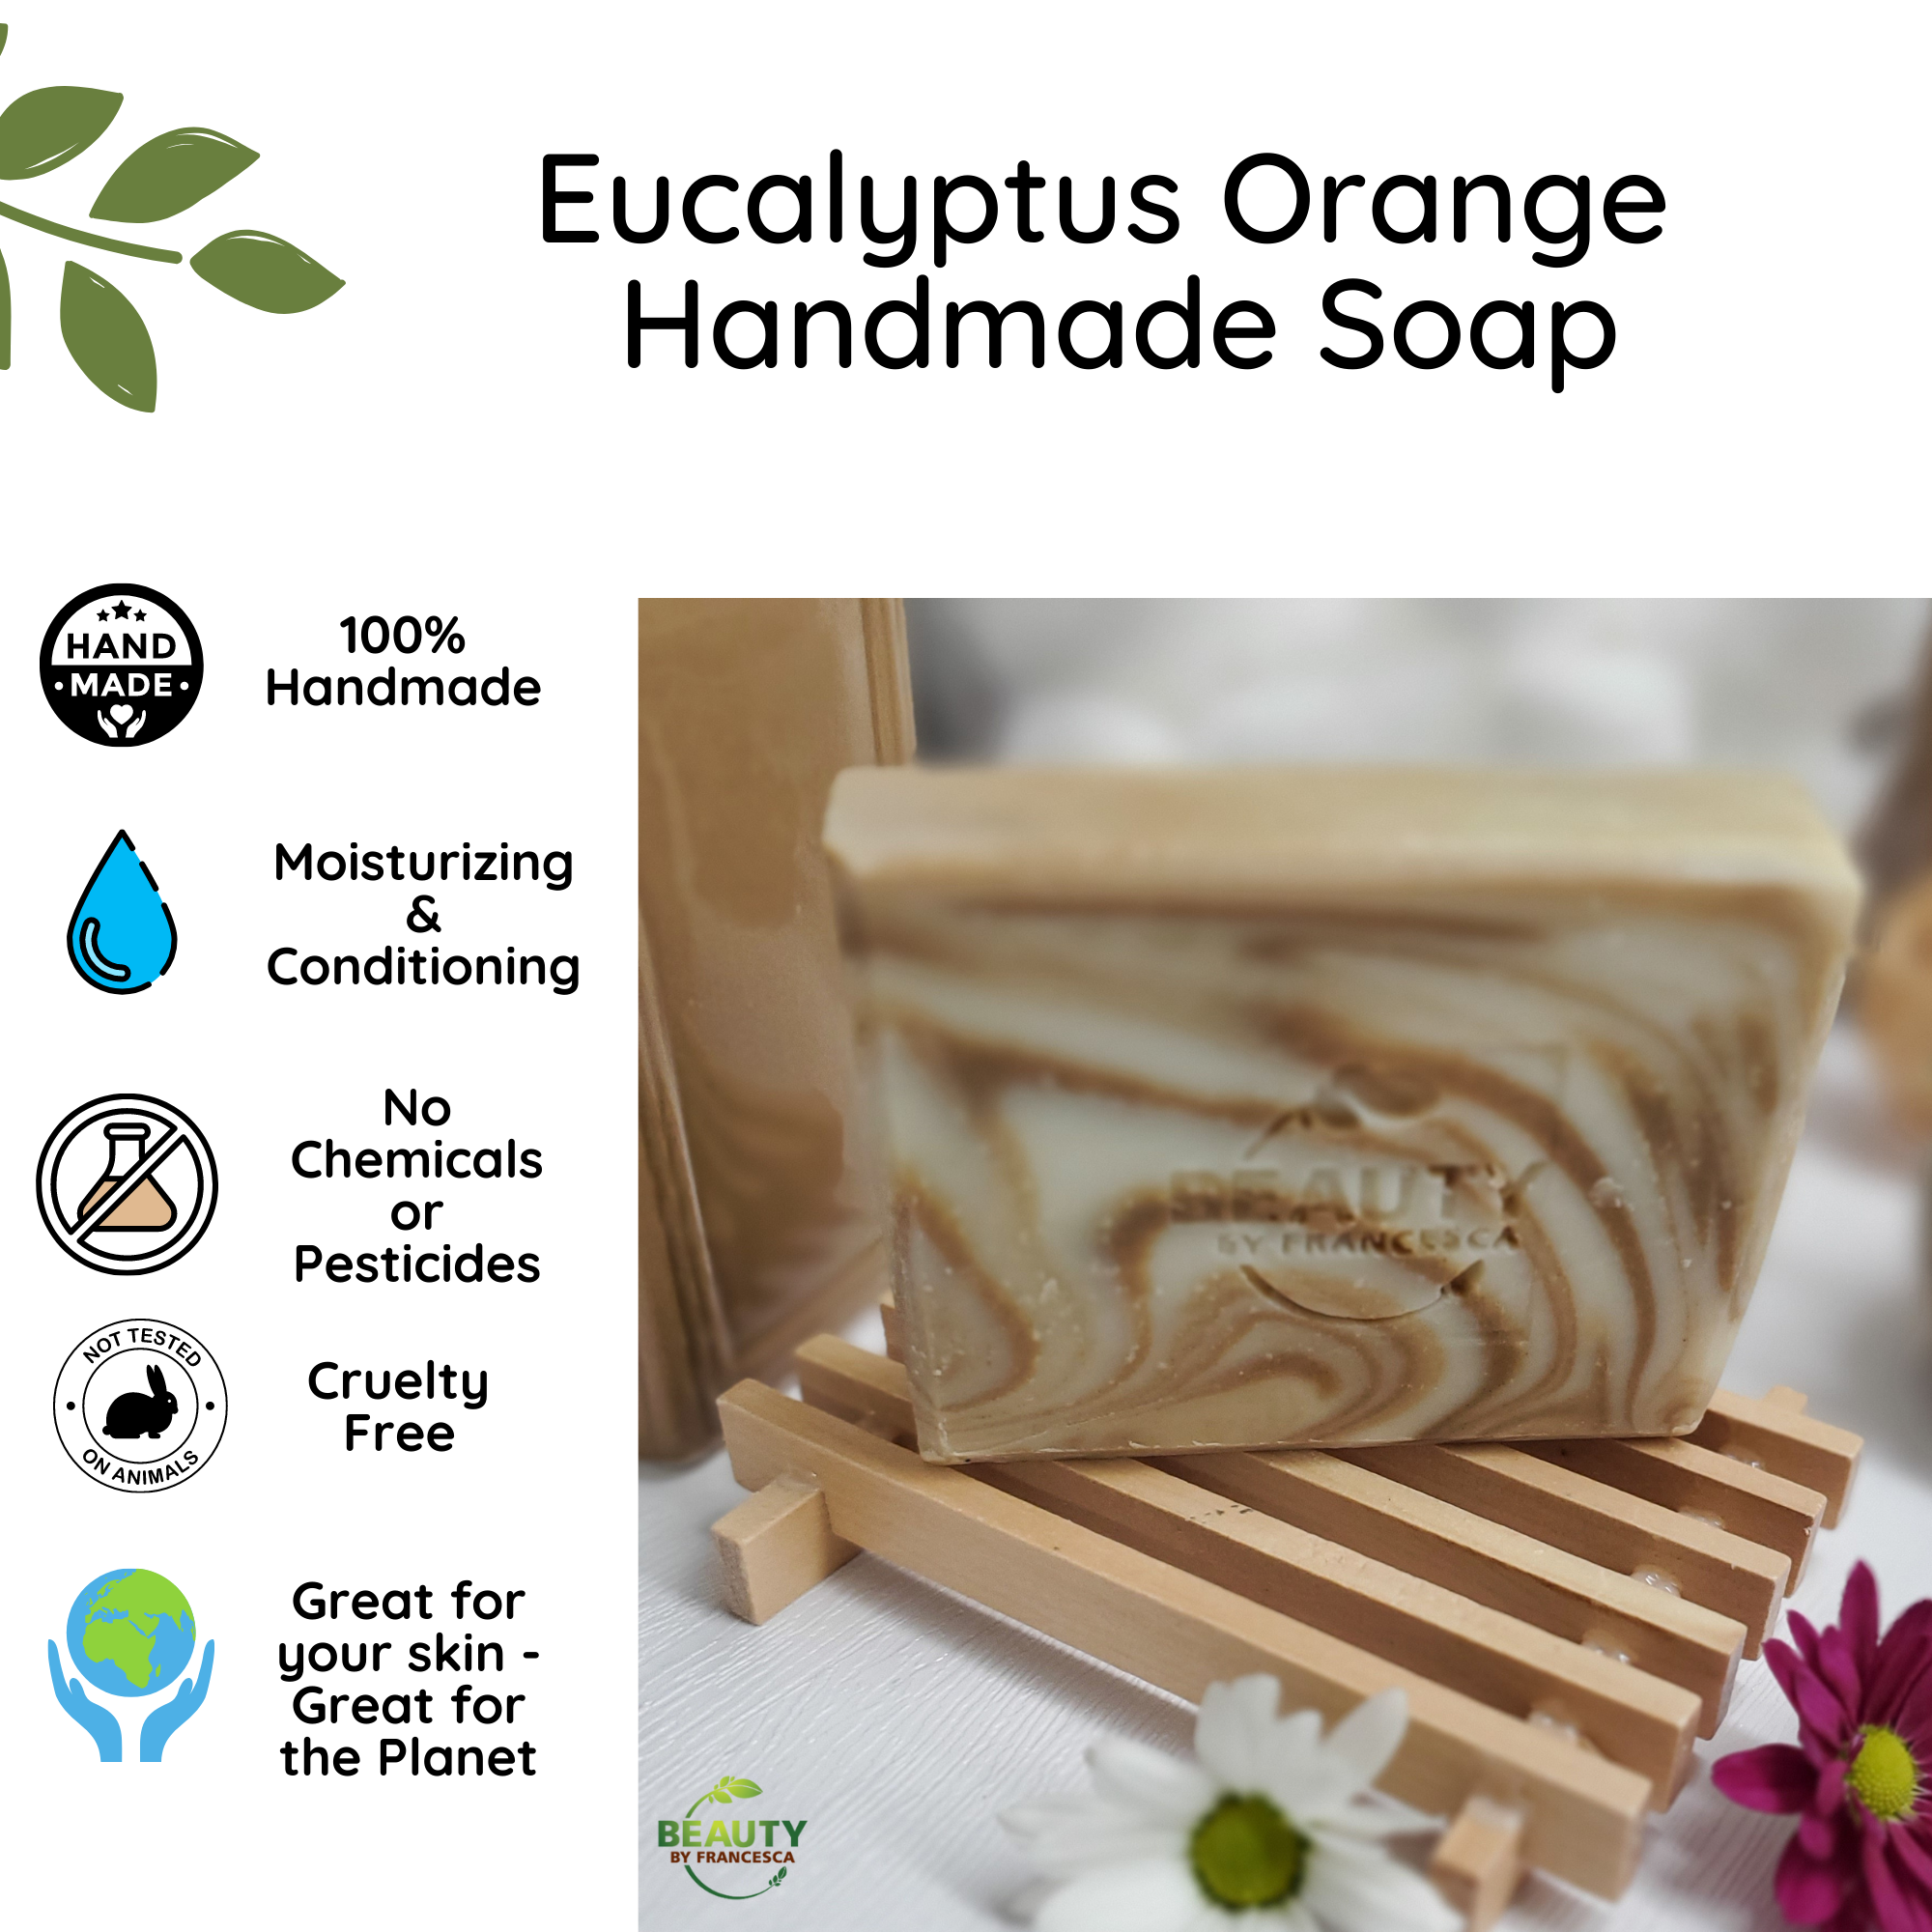 Eucalyptus Orange Handmade Soap Benefits Card Great for skin and planet no chemicals